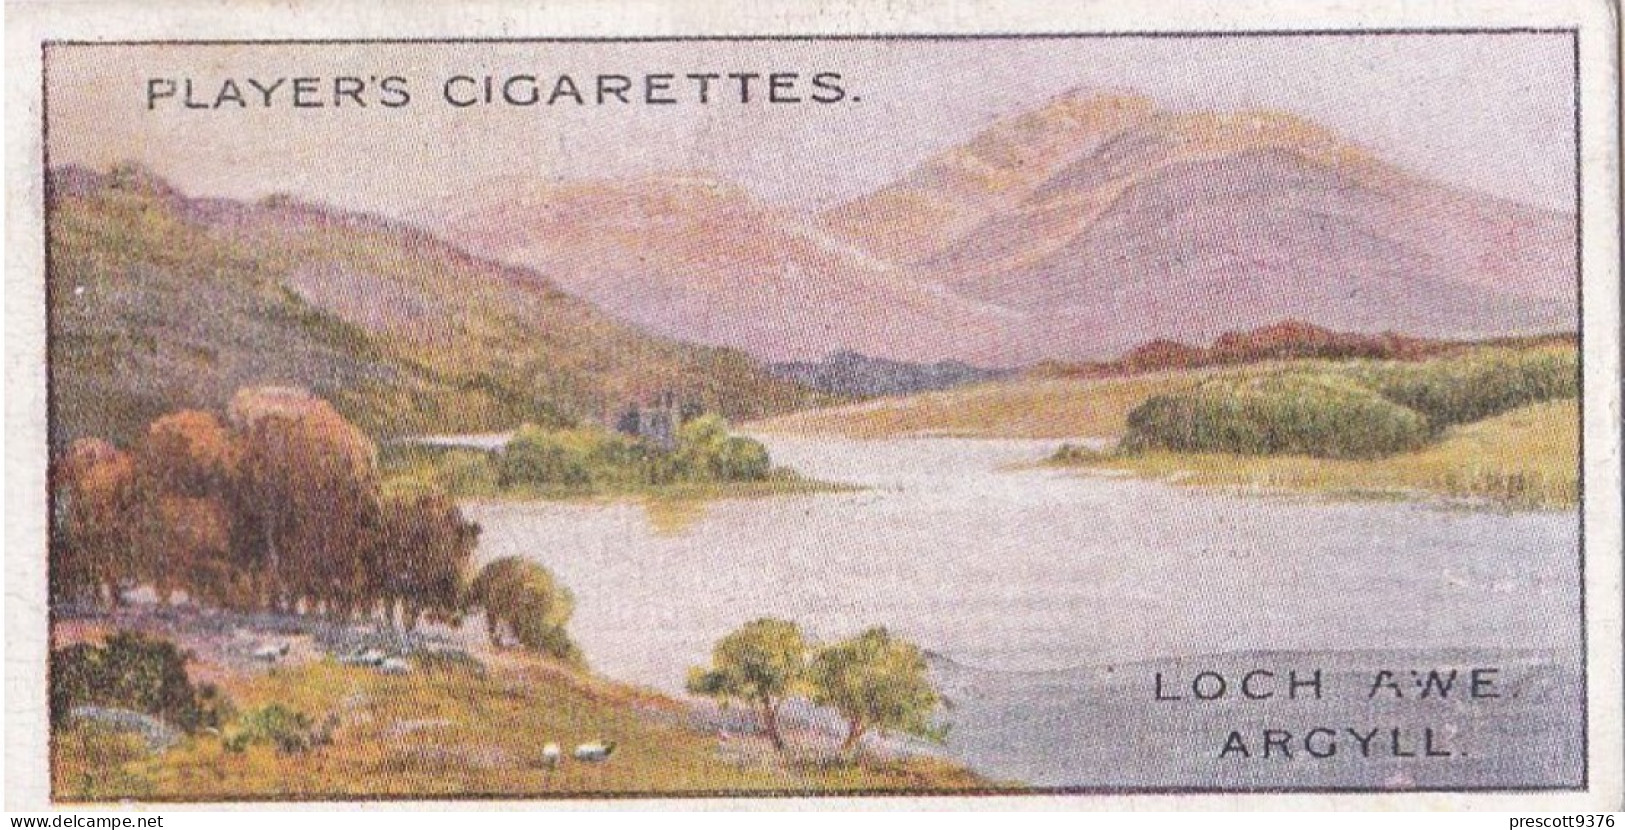 Gems Of British Scenery 1917 - Players Cigarette Card - 23 Loch Awe, Argyll - Player's